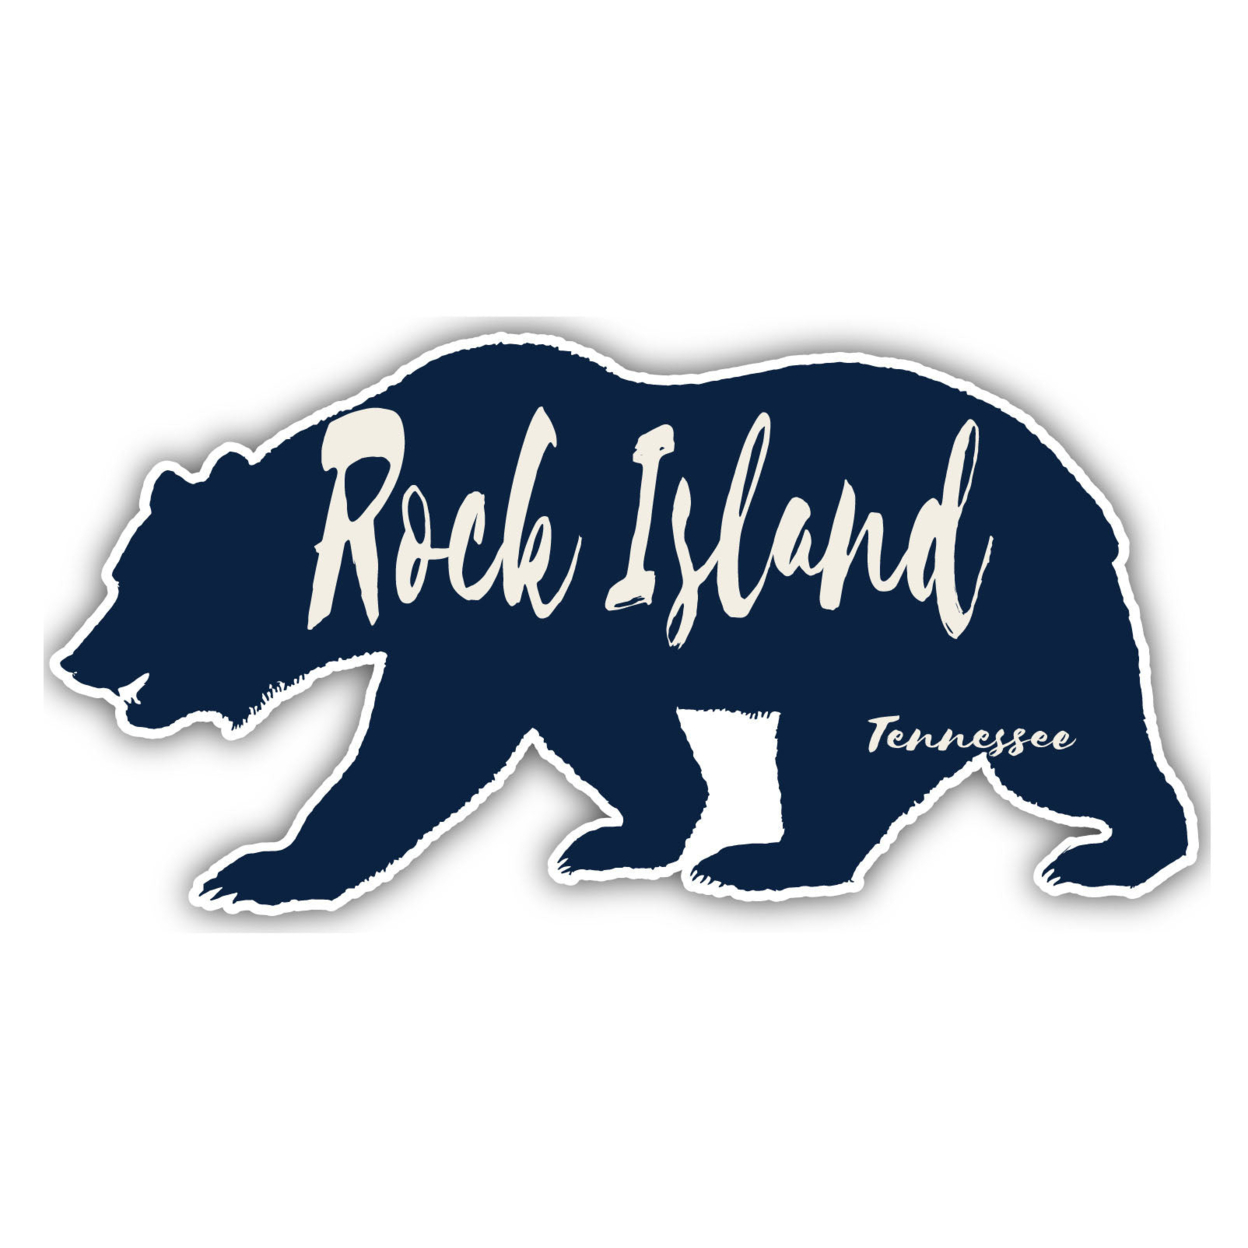 Rock Island Tennessee Souvenir Decorative Stickers (Choose Theme And Size) - Single Unit, 4-Inch, Tent